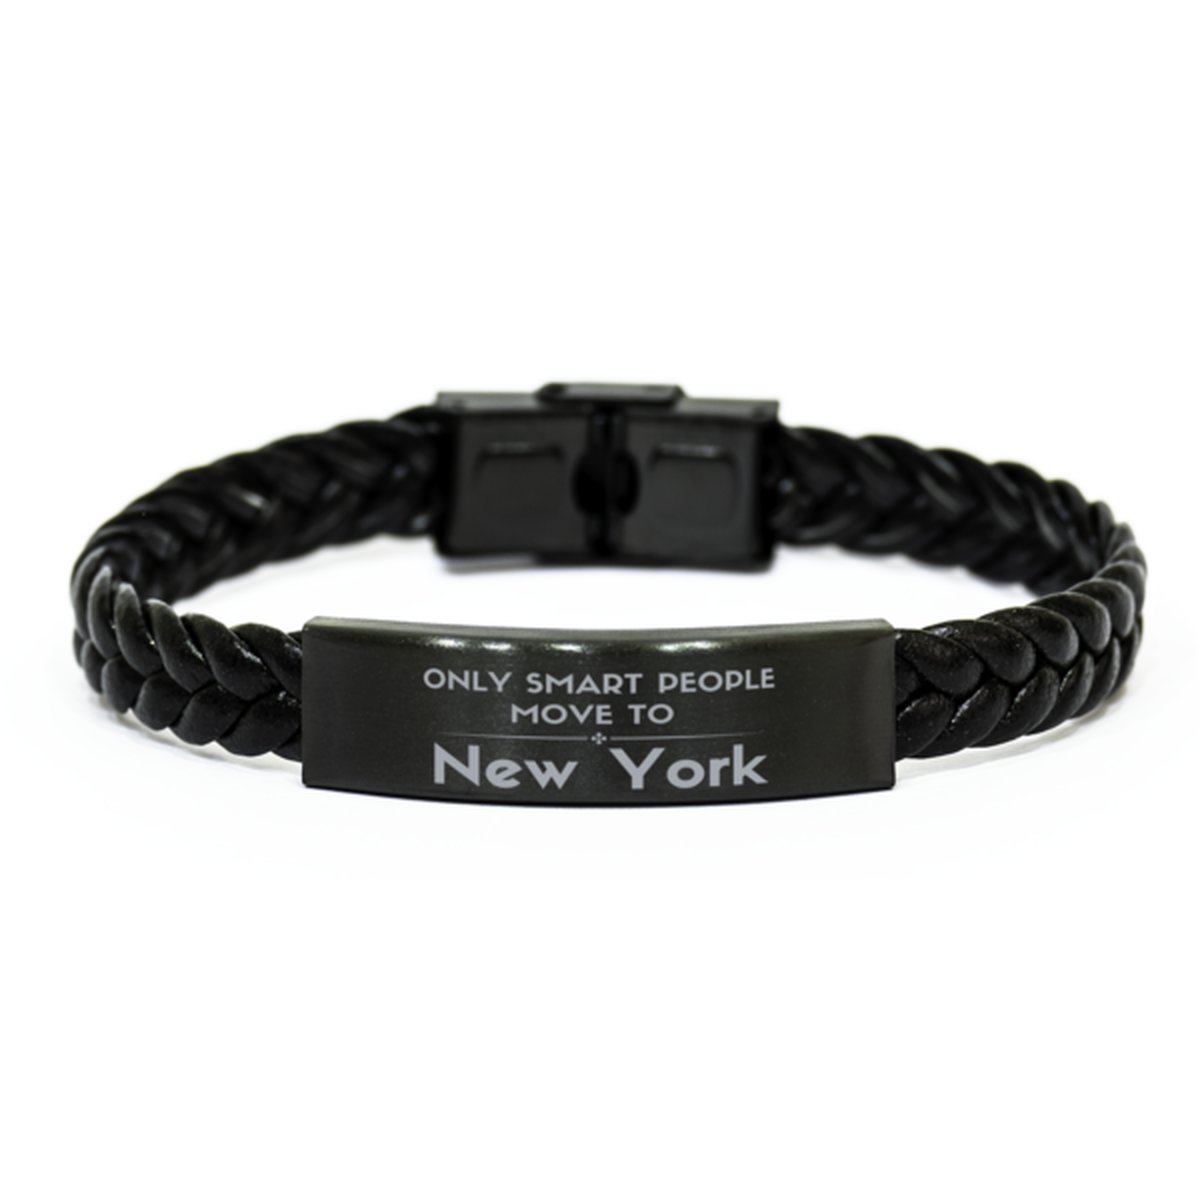 Only smart people move to New York Braided Leather Bracelet, Gag Gifts For New York, Move to New York Gifts for Friends Coworker Funny Saying Quote